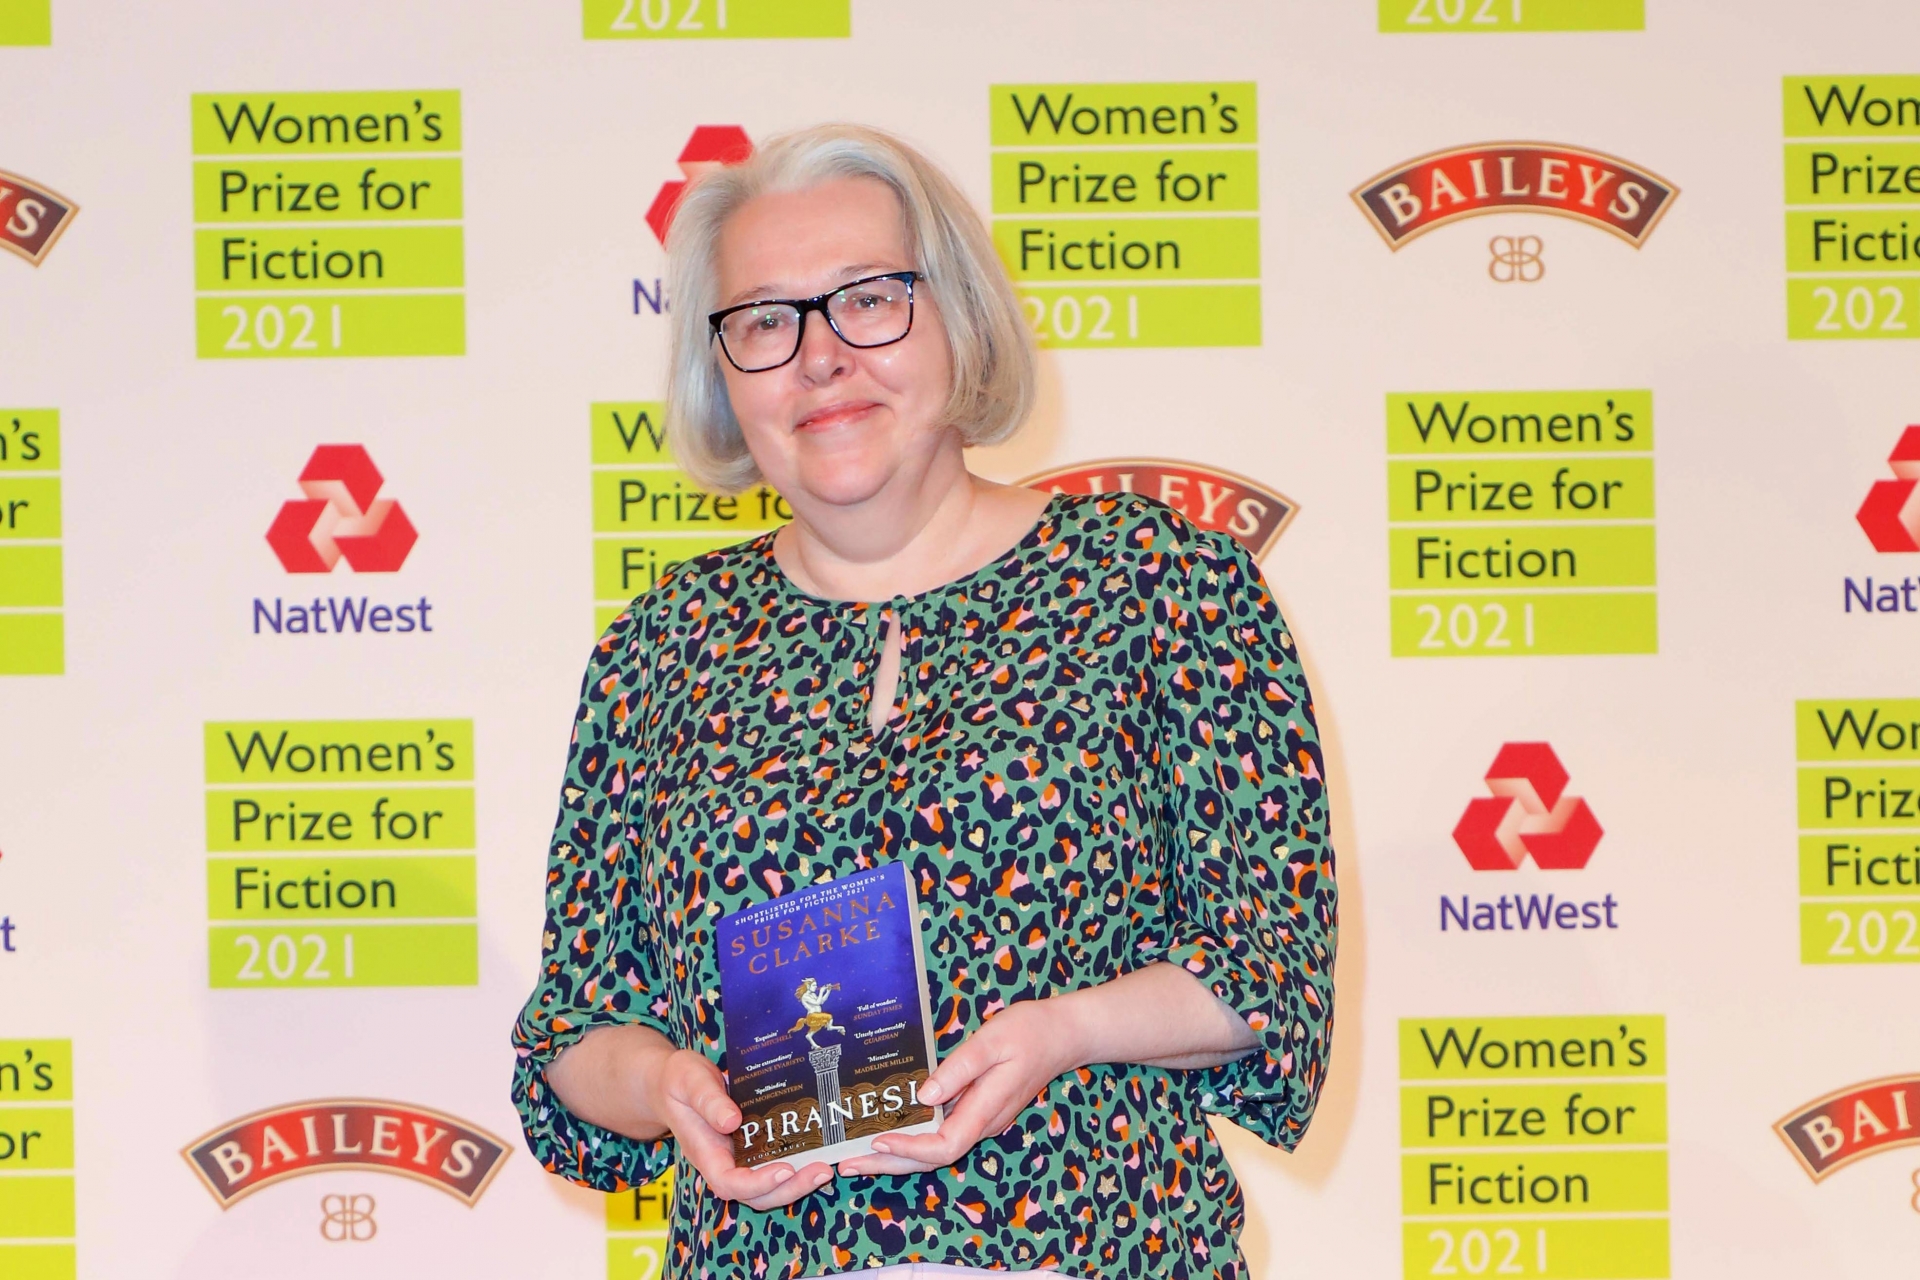 Susanna Clarke wins the 2021 Women's Prize for Fiction with her second novel Piranesi